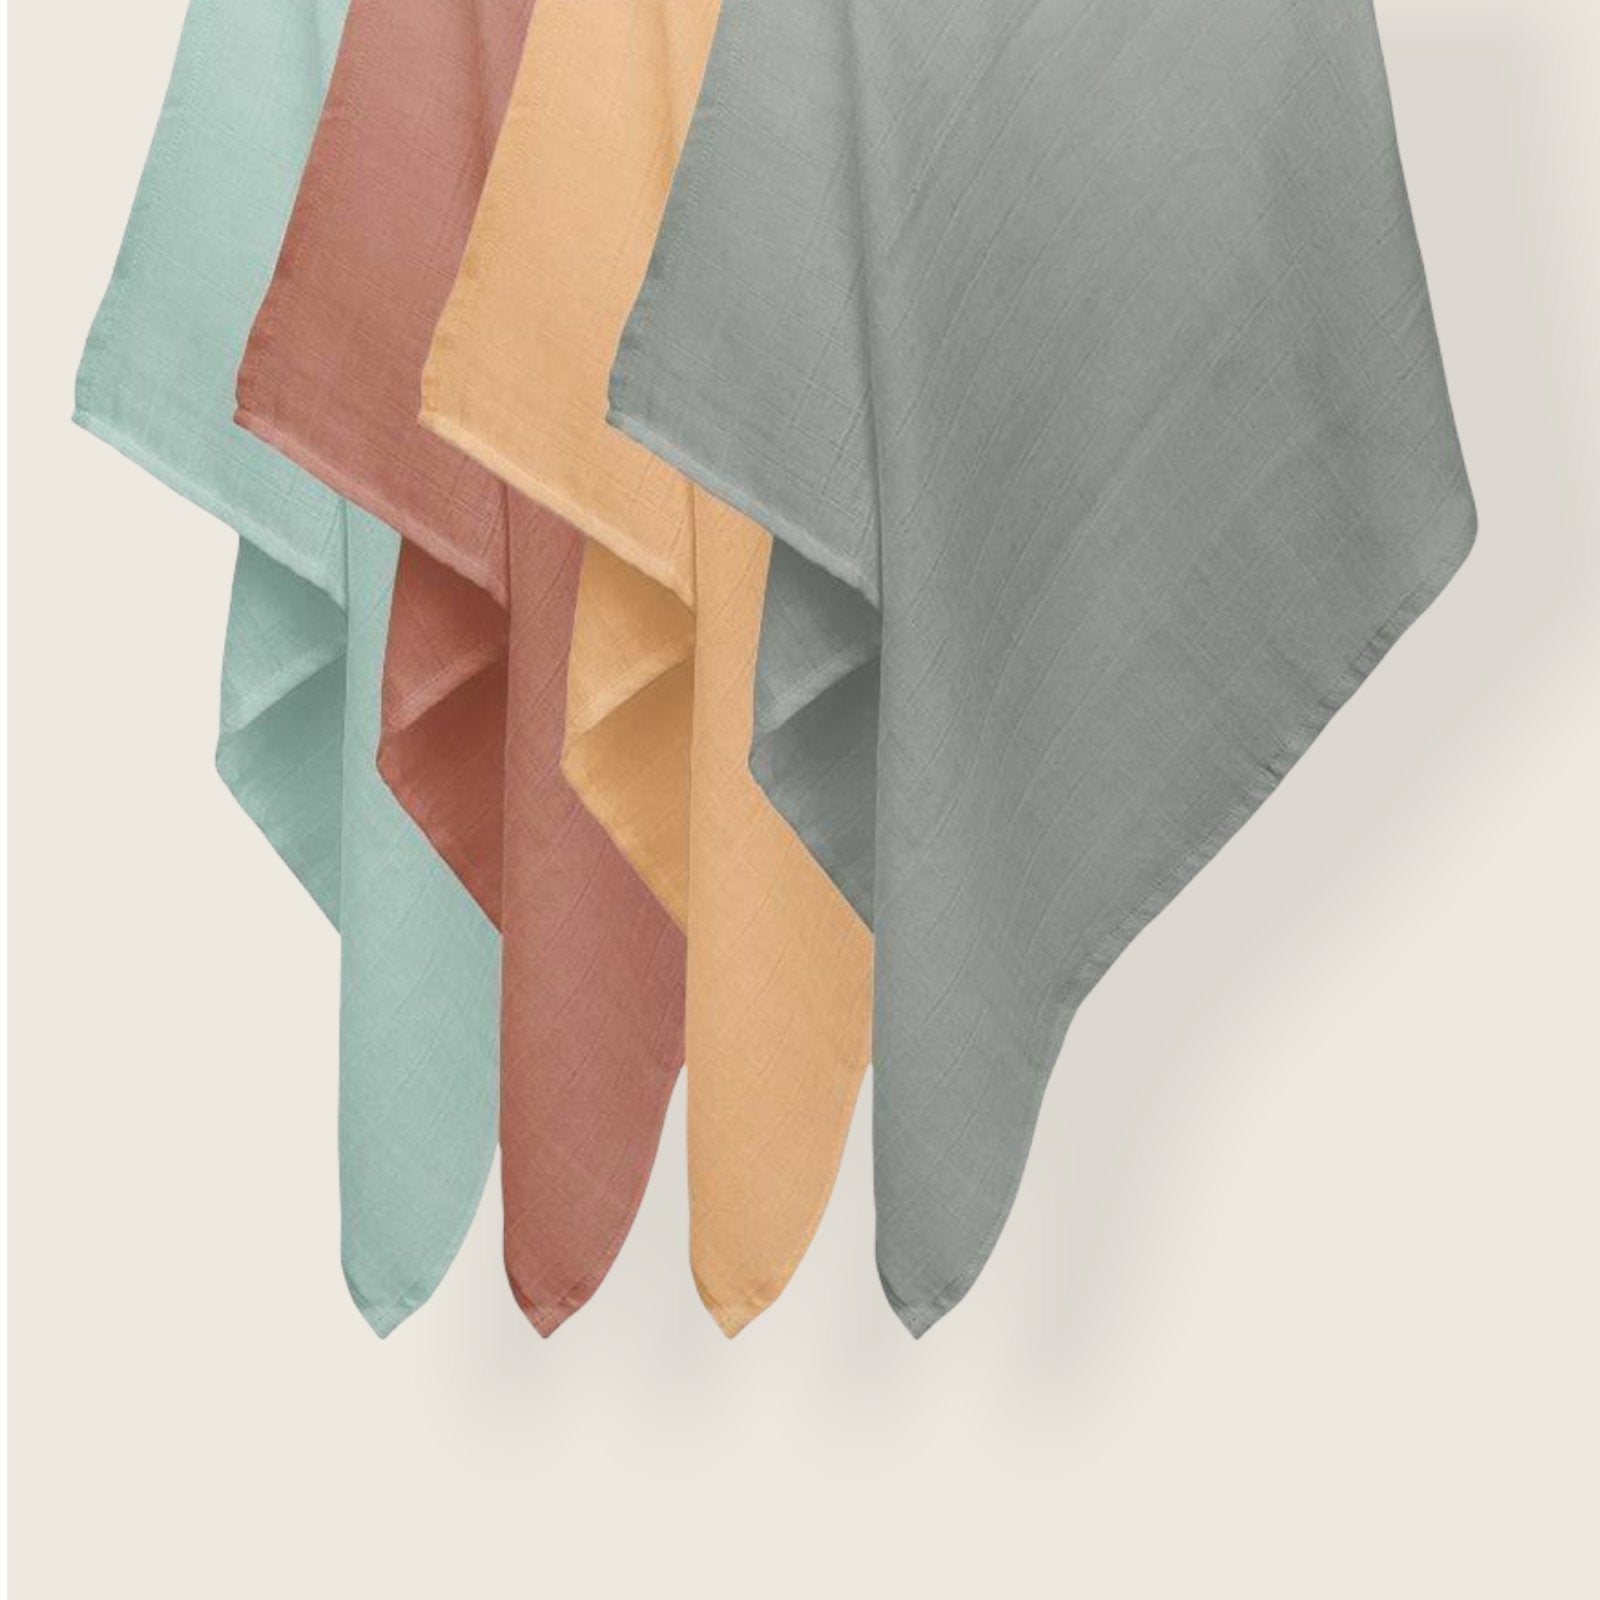 Bambus Mulltuch „Swaddle“ find Stylish Fashion for Little People- at Little Foxx Concept Store